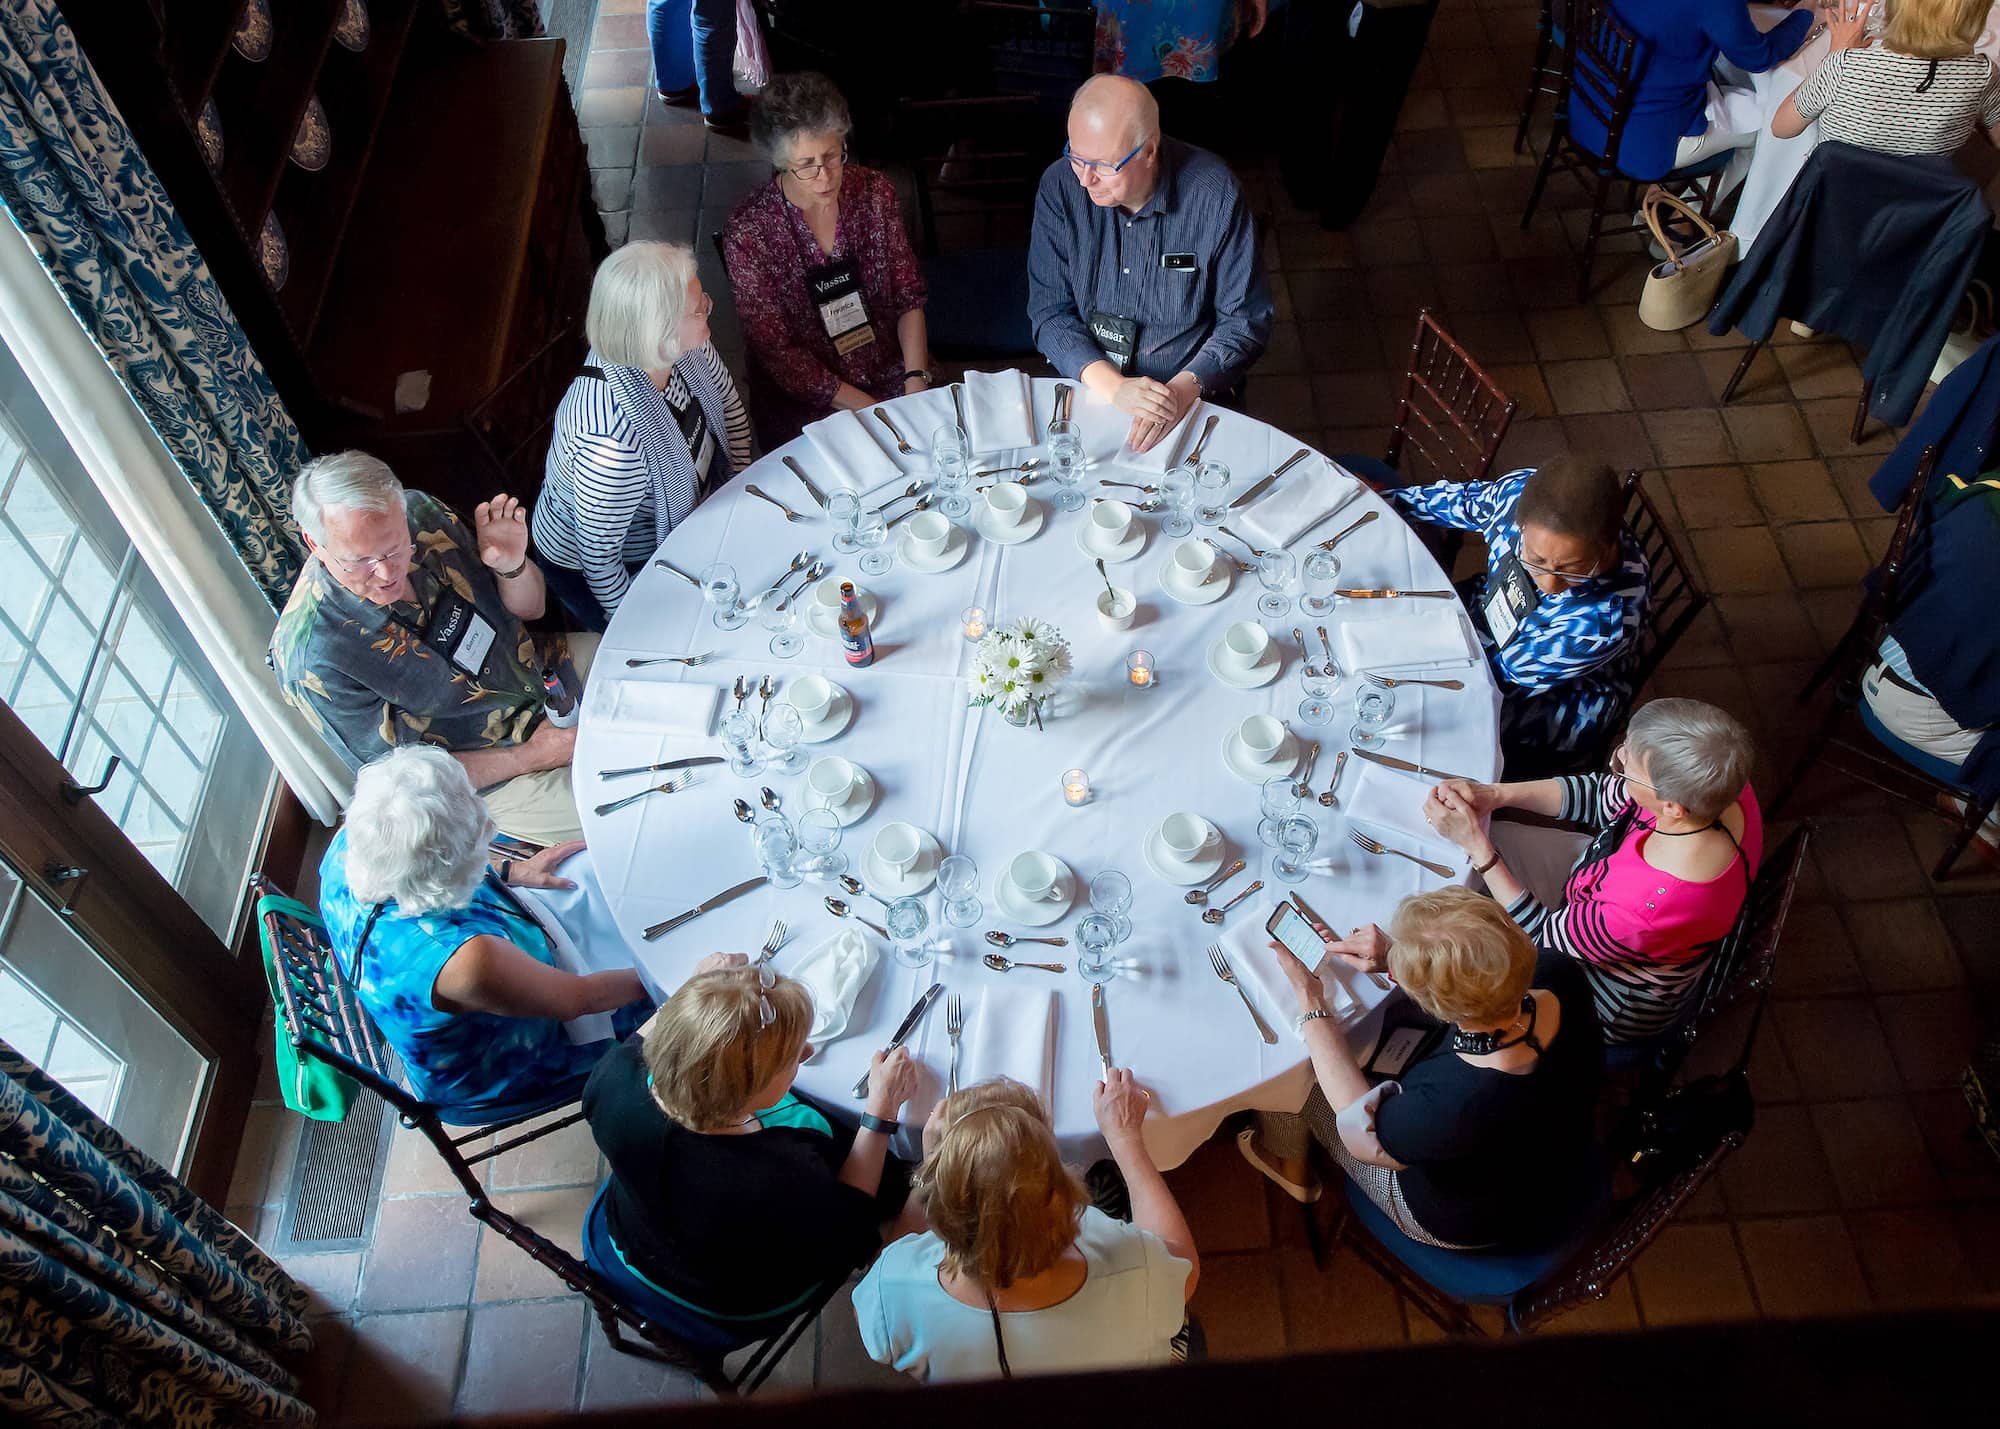 Overhead view of a set table and people seated around it